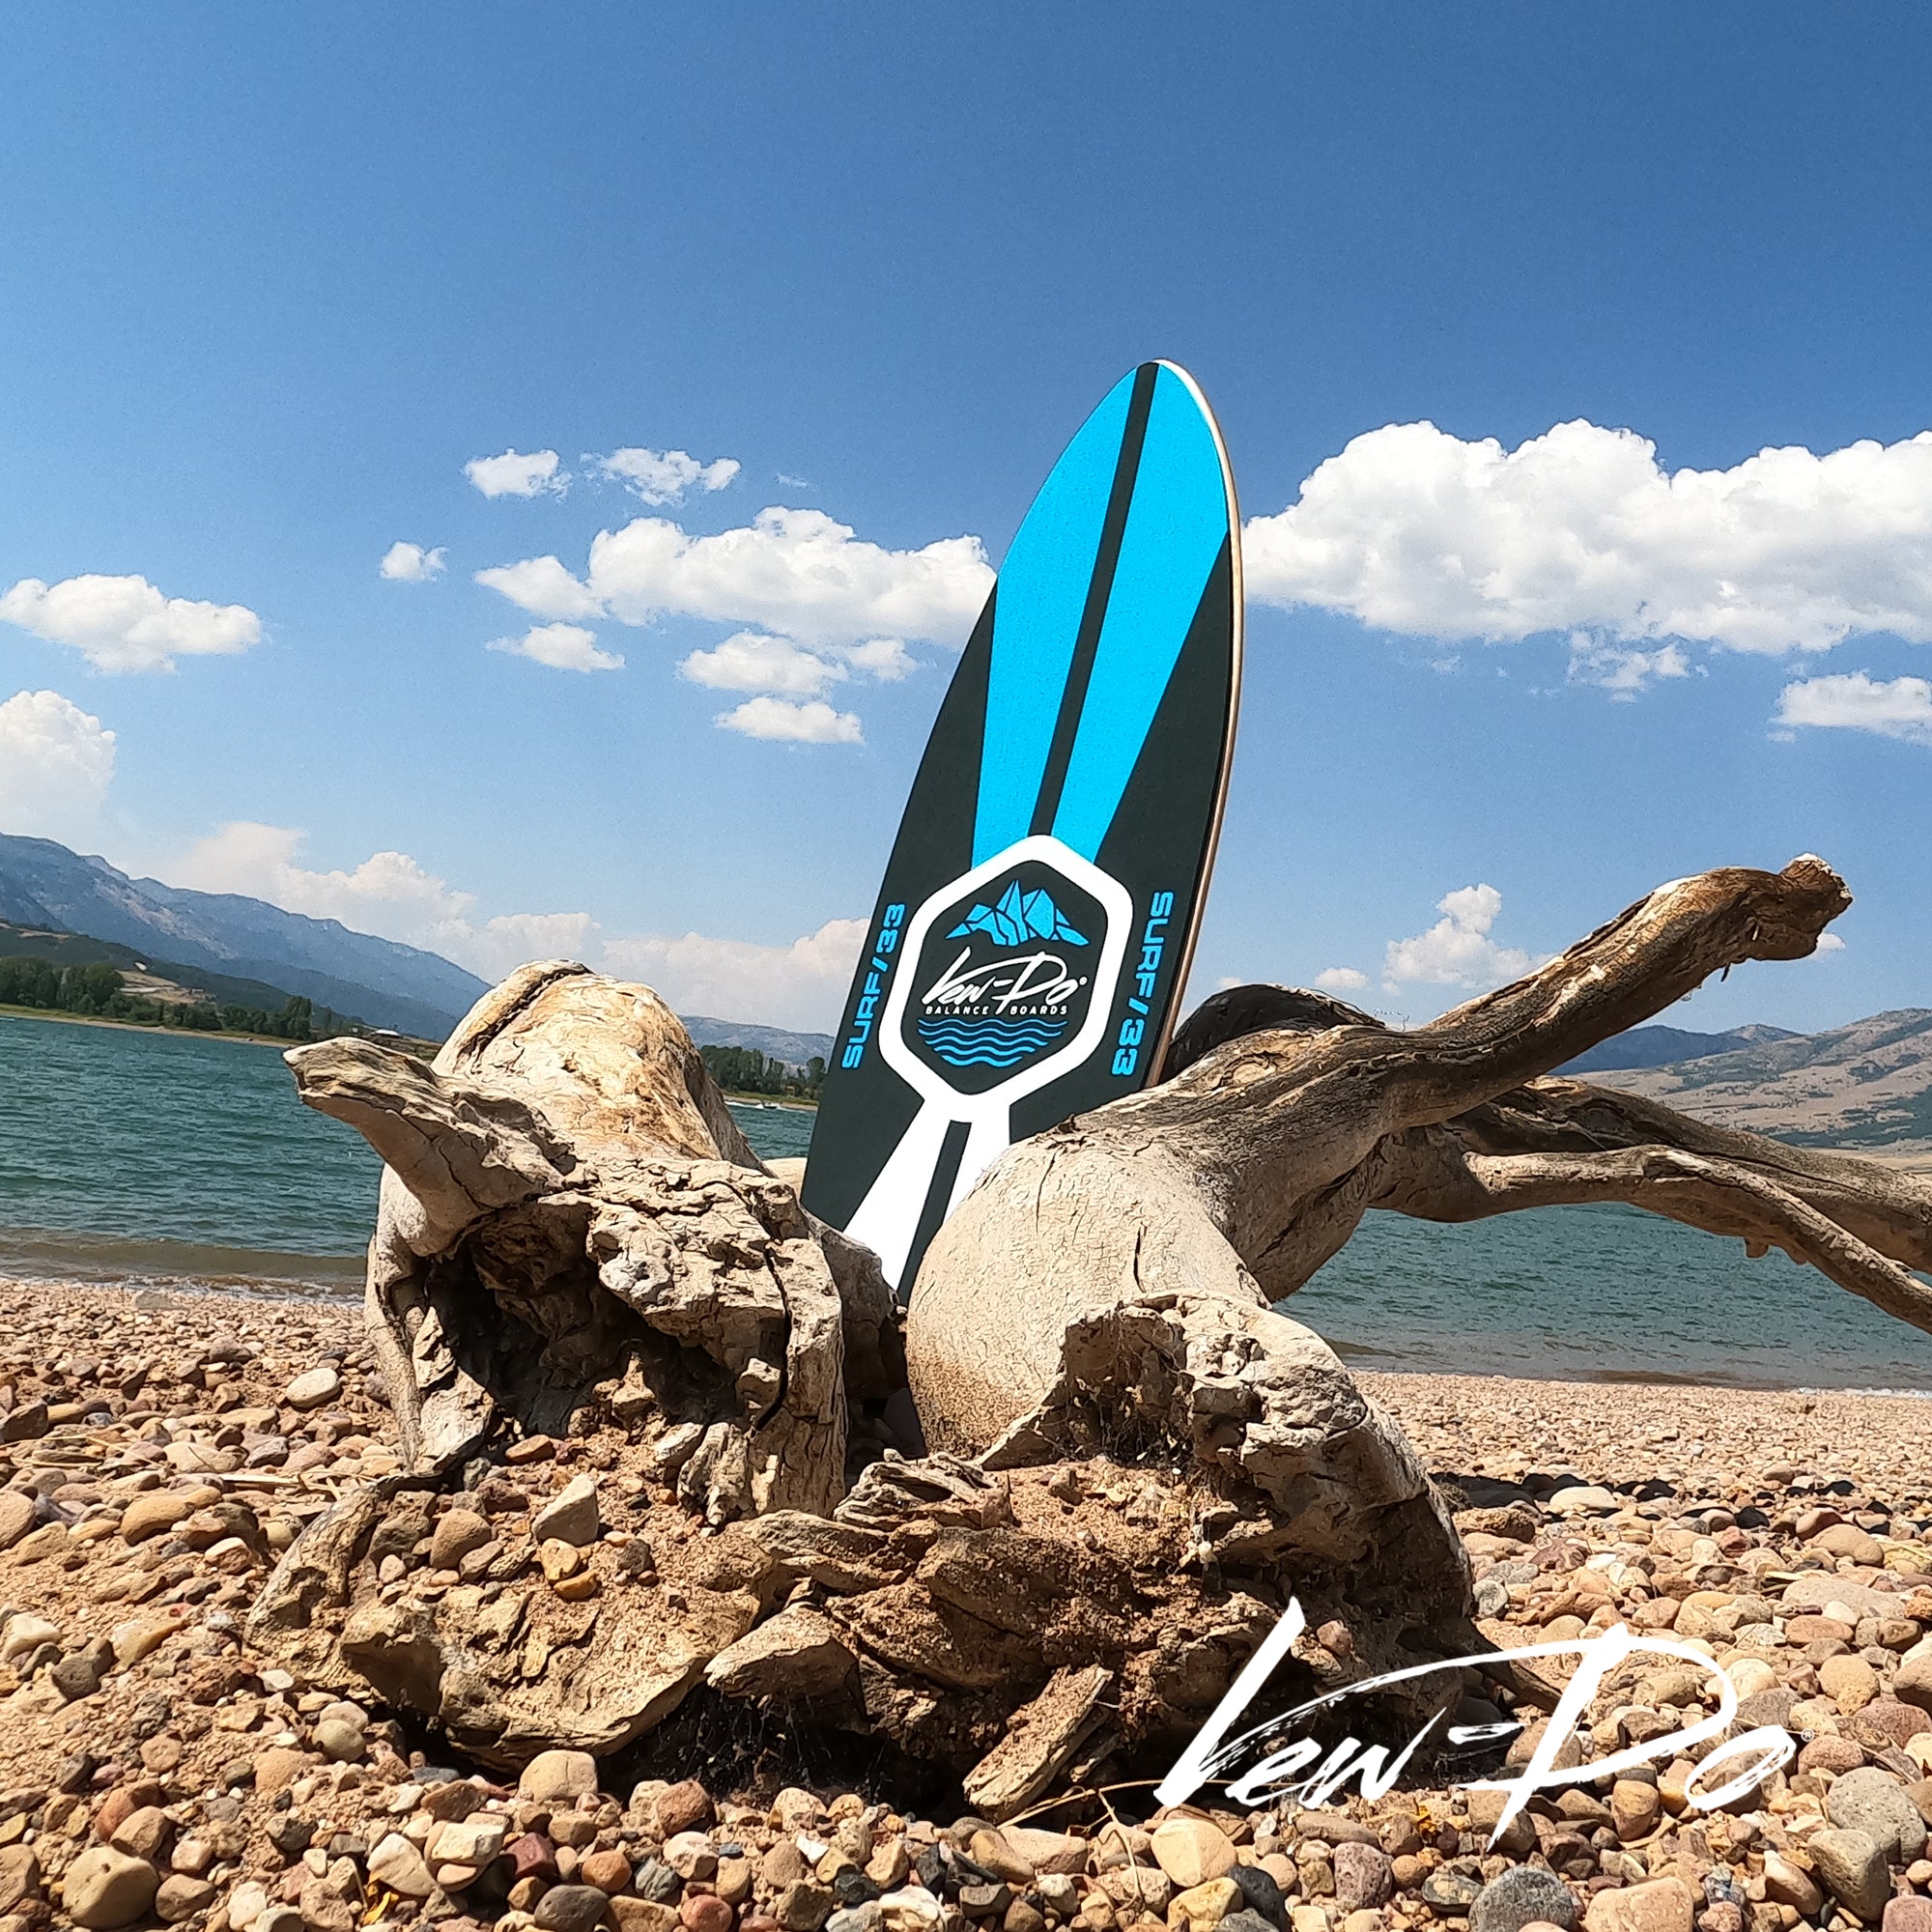 Surf33 Balance Board, Made For Surfers